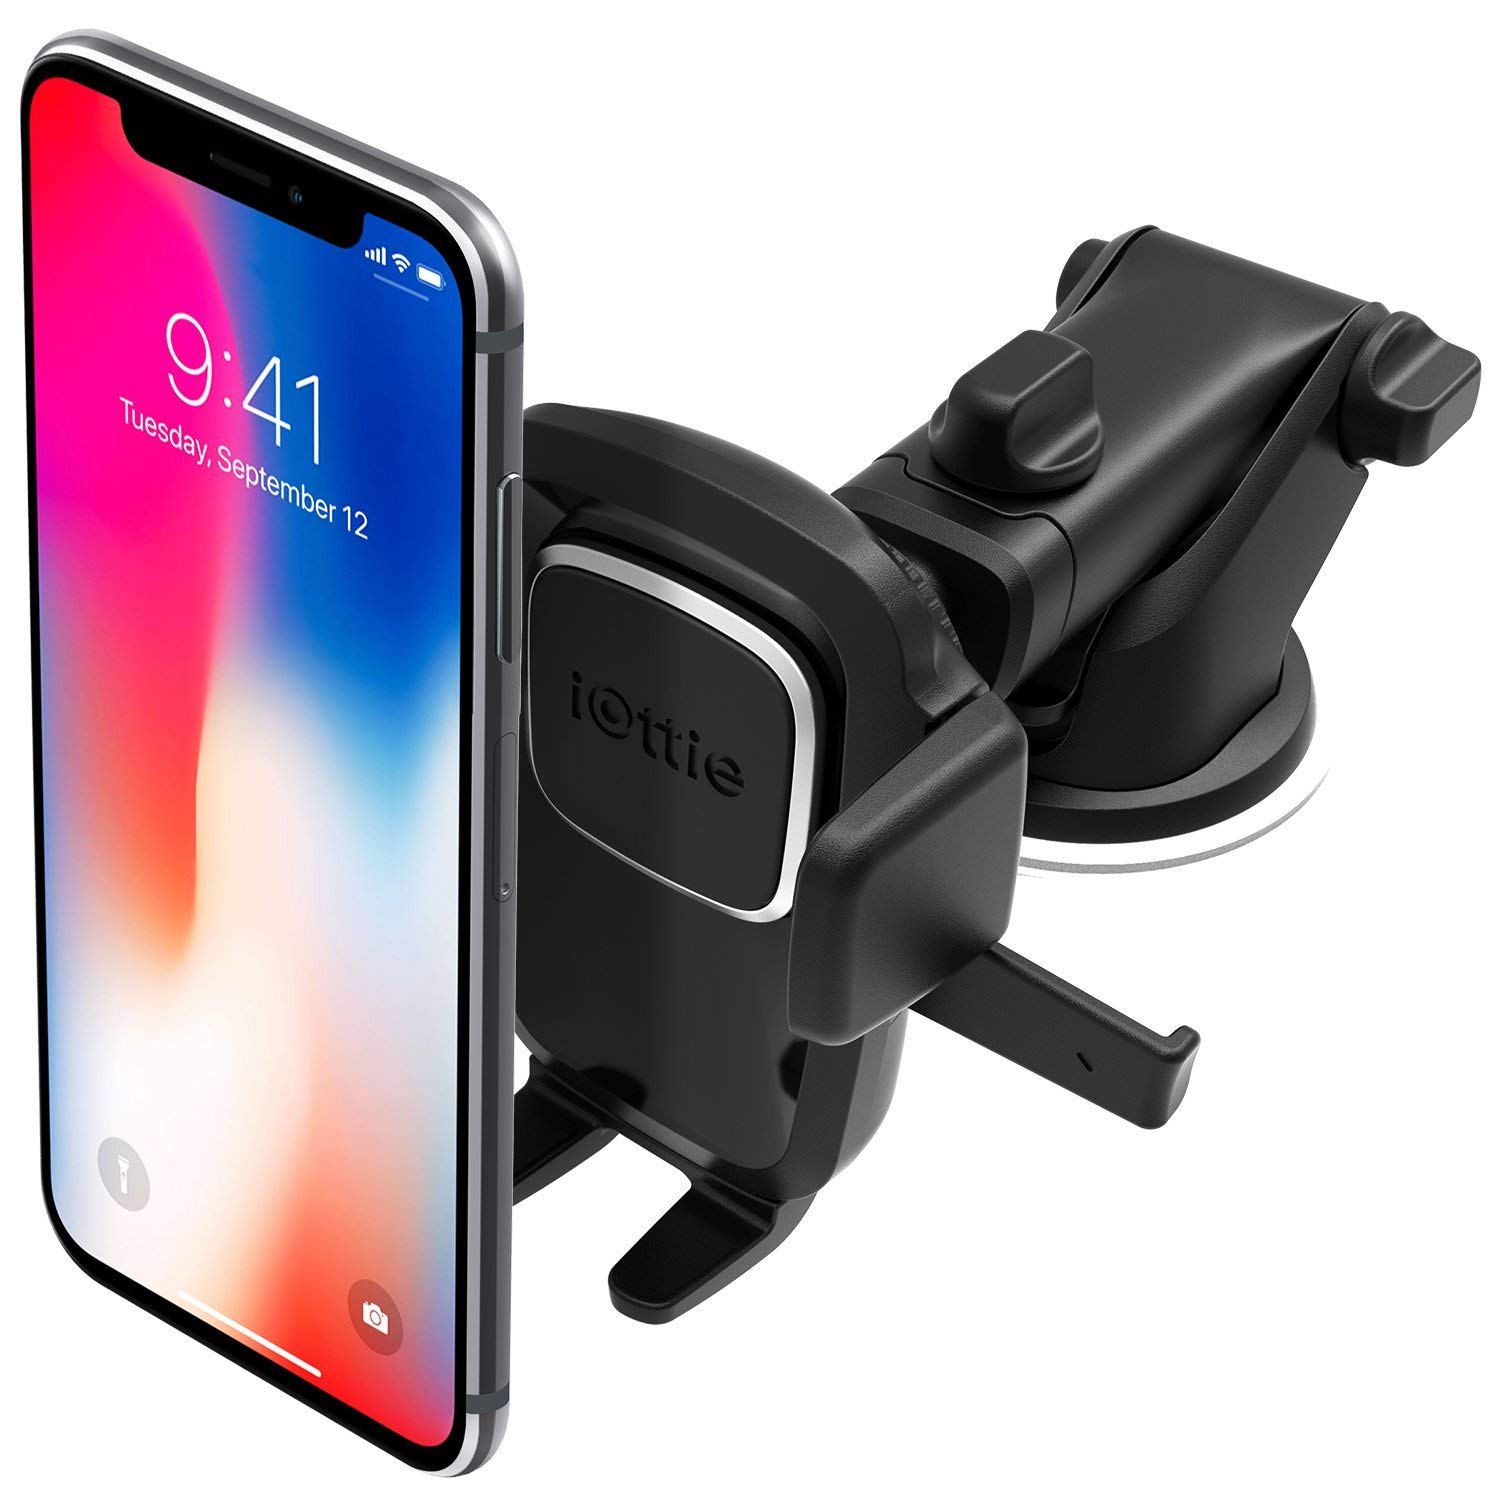 iOttie Easy One Touch 4 Dashboard & Windshield Car Phone Mount Holder for iPhone Xs Max R 8 Plus 7 6s SE Samsung Galaxy S9 S8 Edge S7 S6 Note 9 &a 1